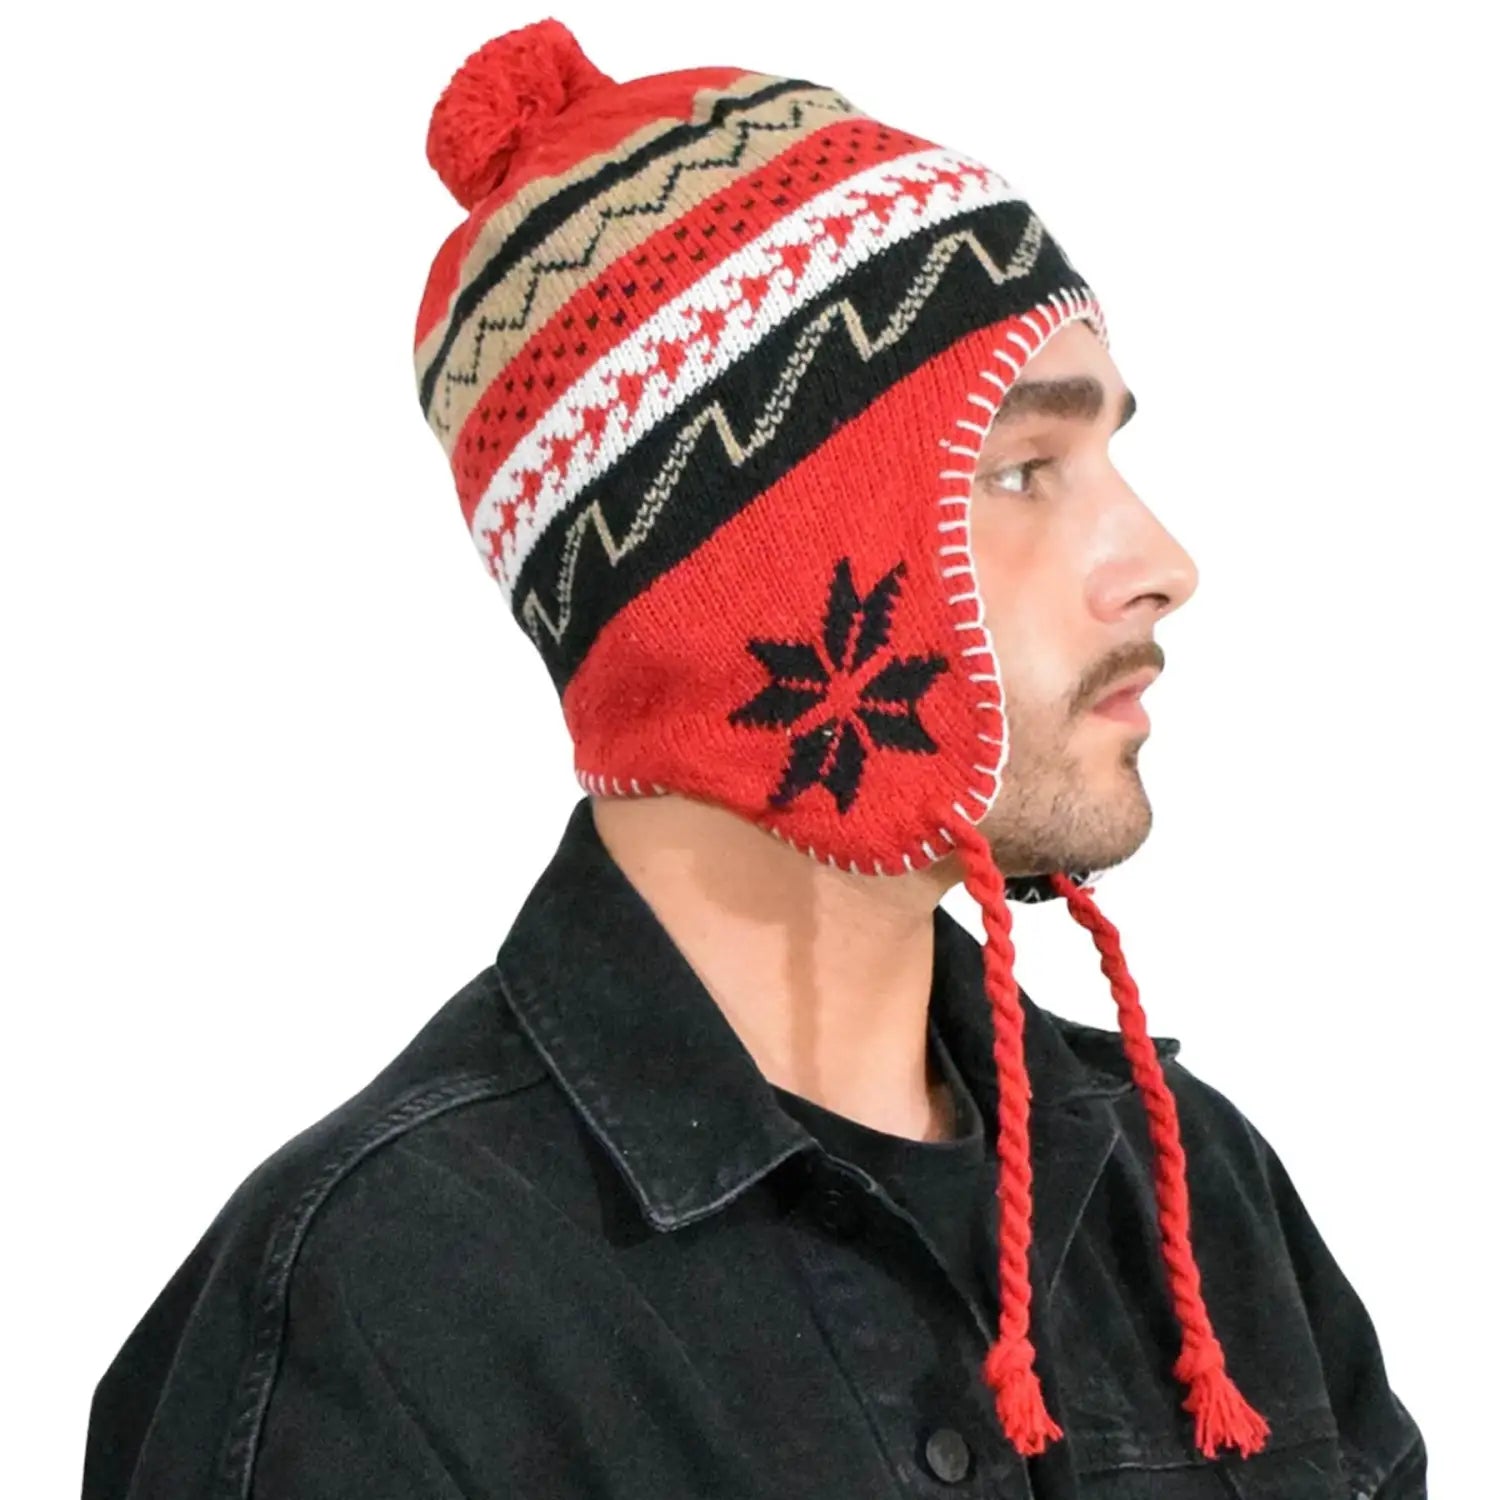 Unisex Peruvian Winter Hats - Snowflake Pattern, Fleece Lined: man in red and black knit hat